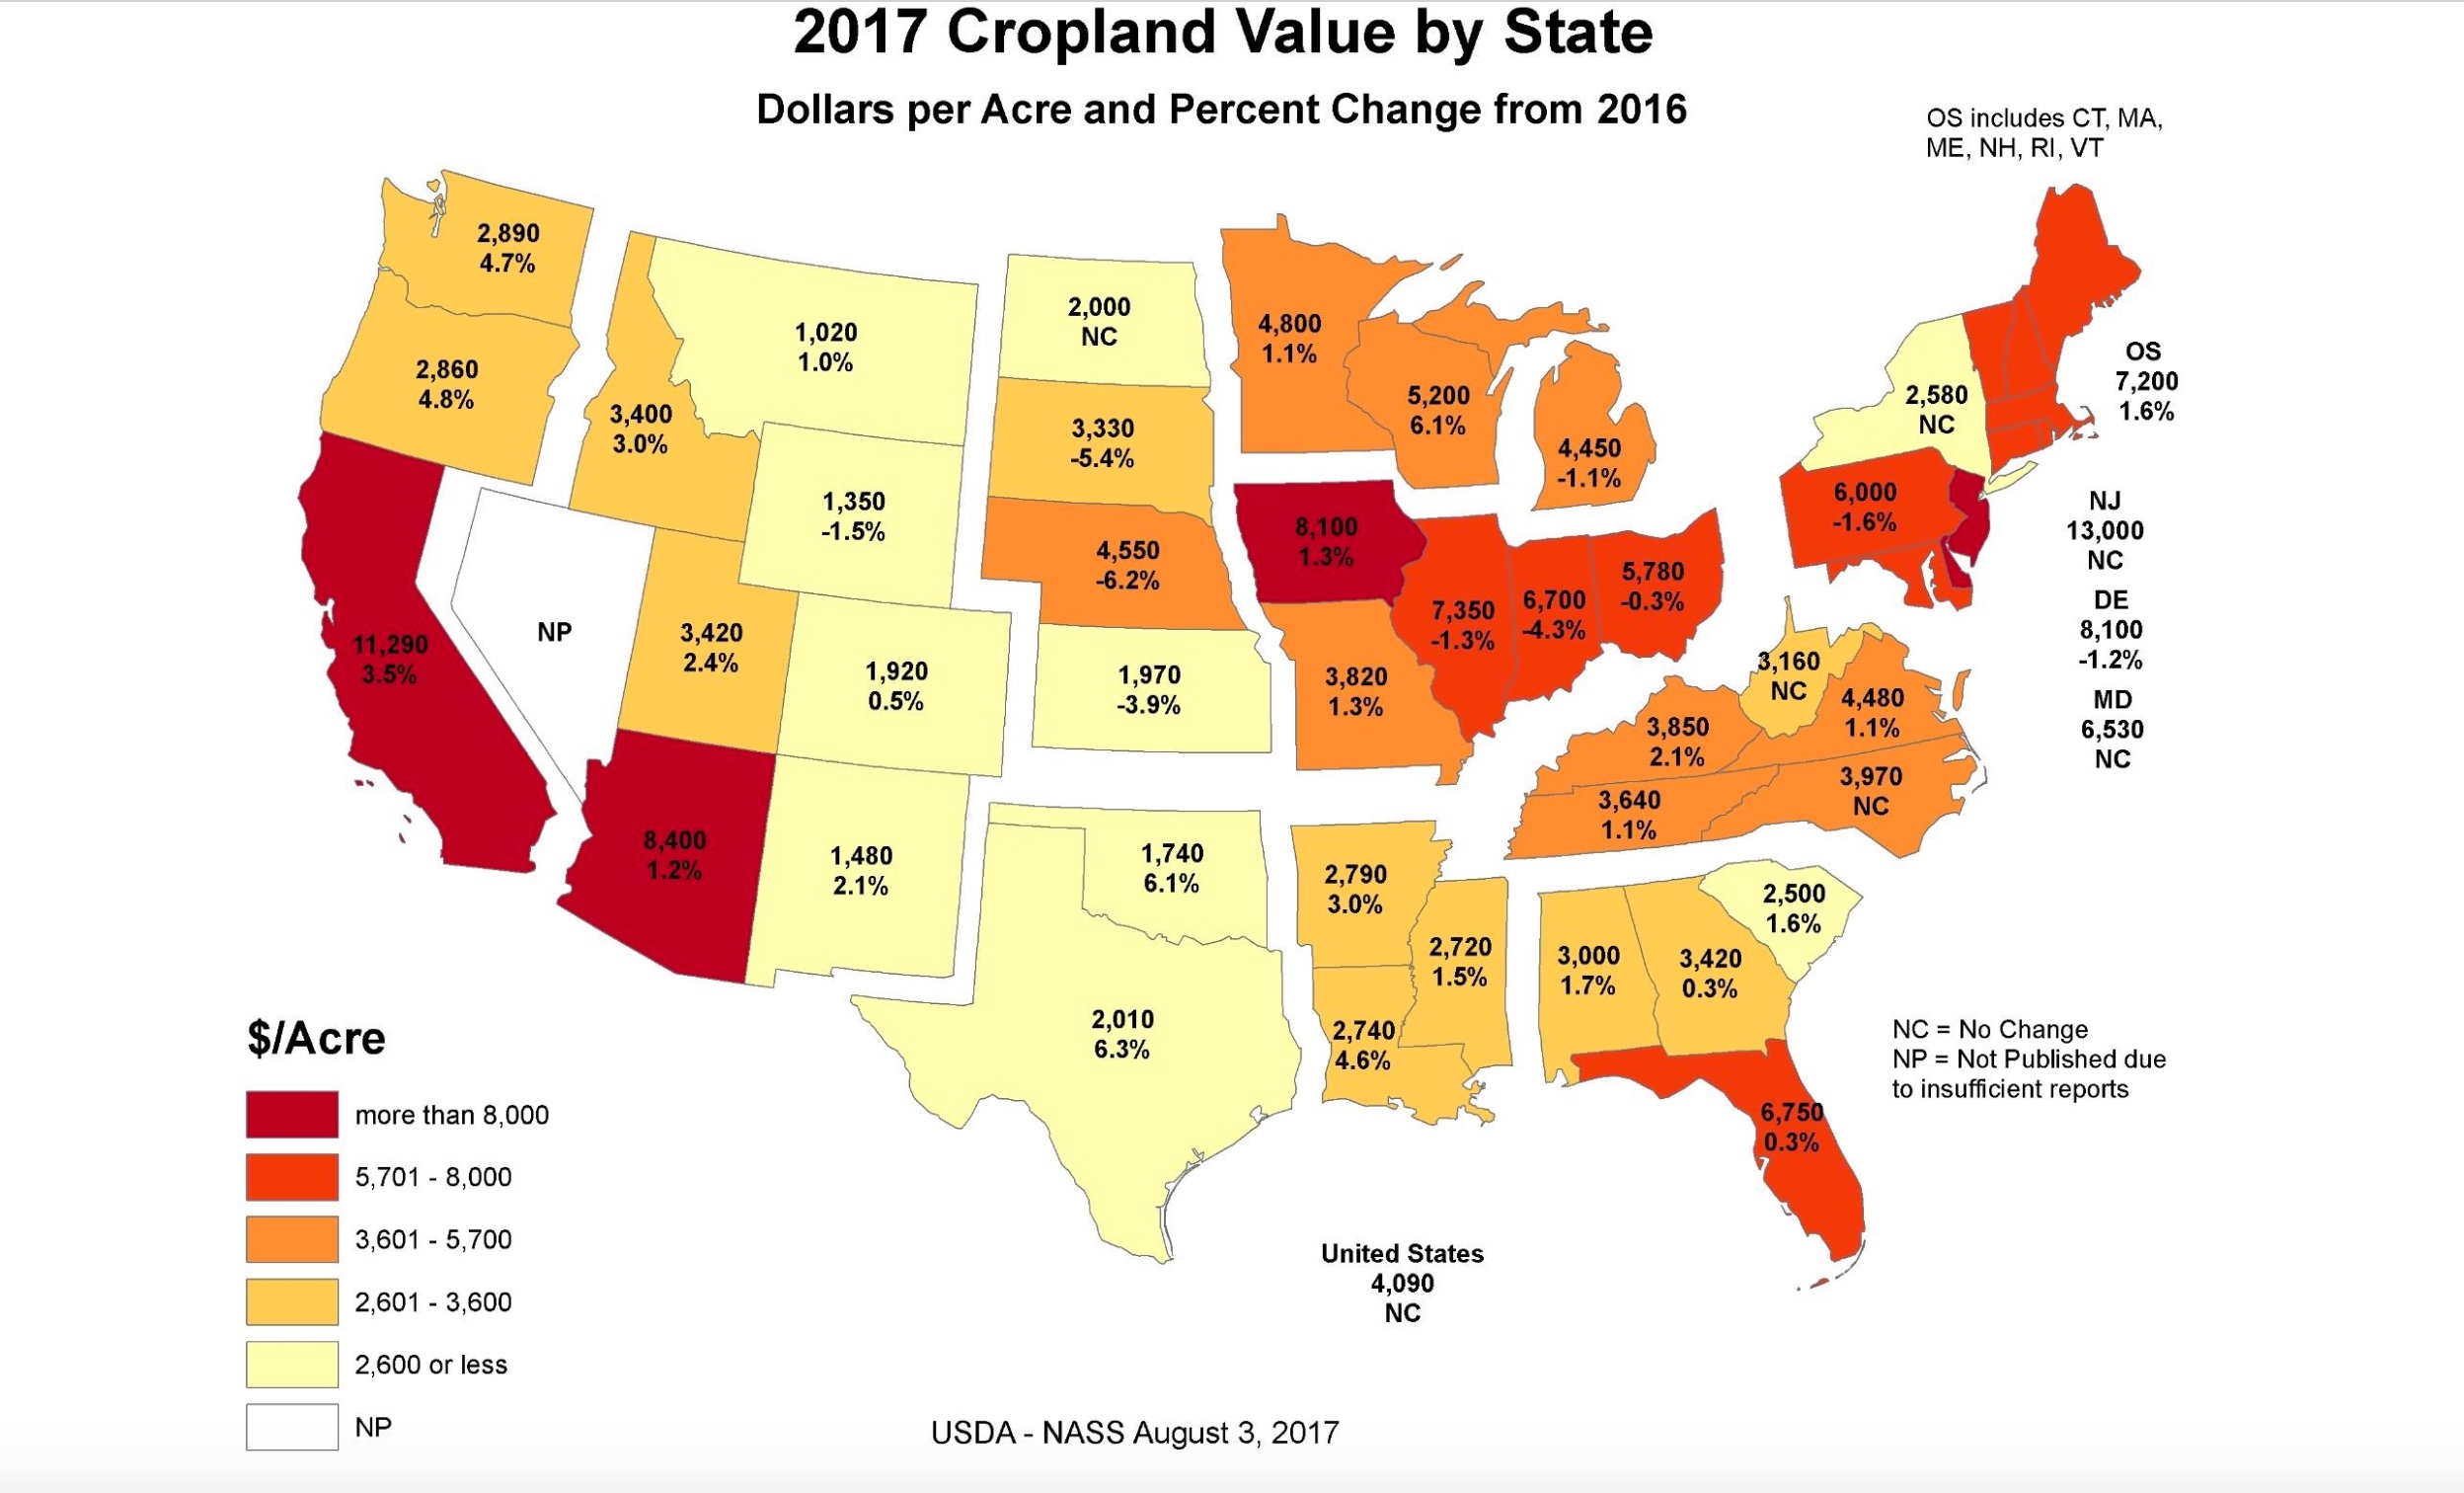 2017 USA cropland value by state in dollars per acre and change from